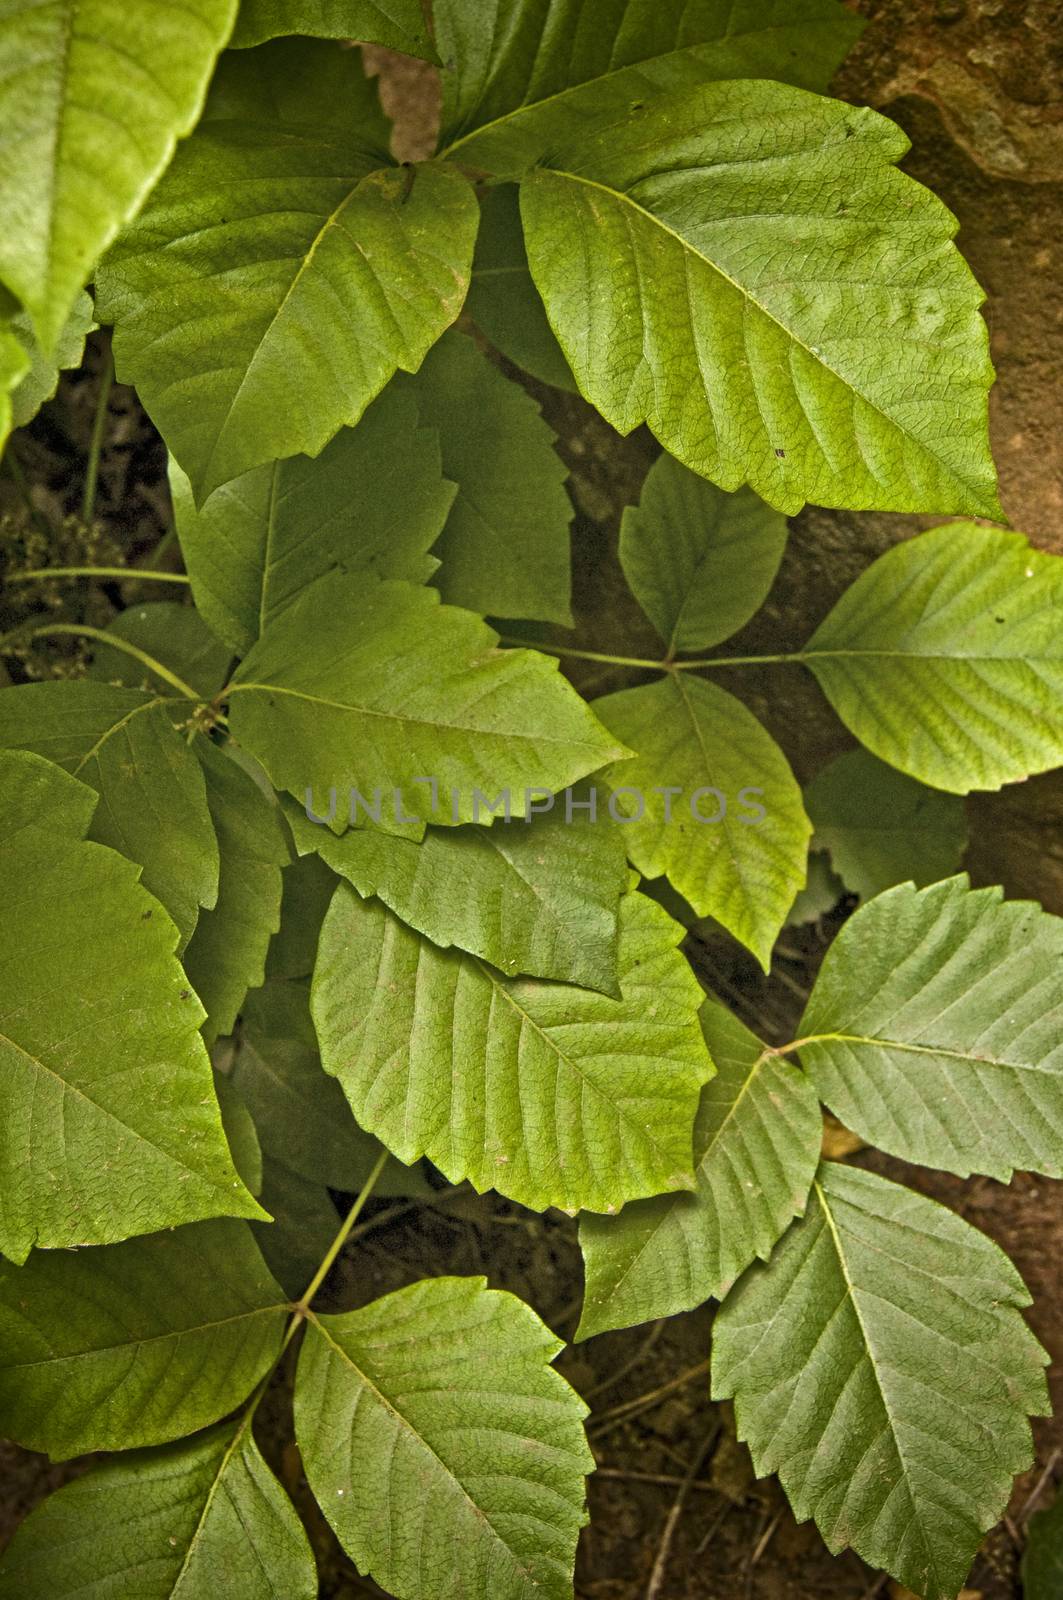 Poison Ivy (Toxicodendron radicans) by Njean